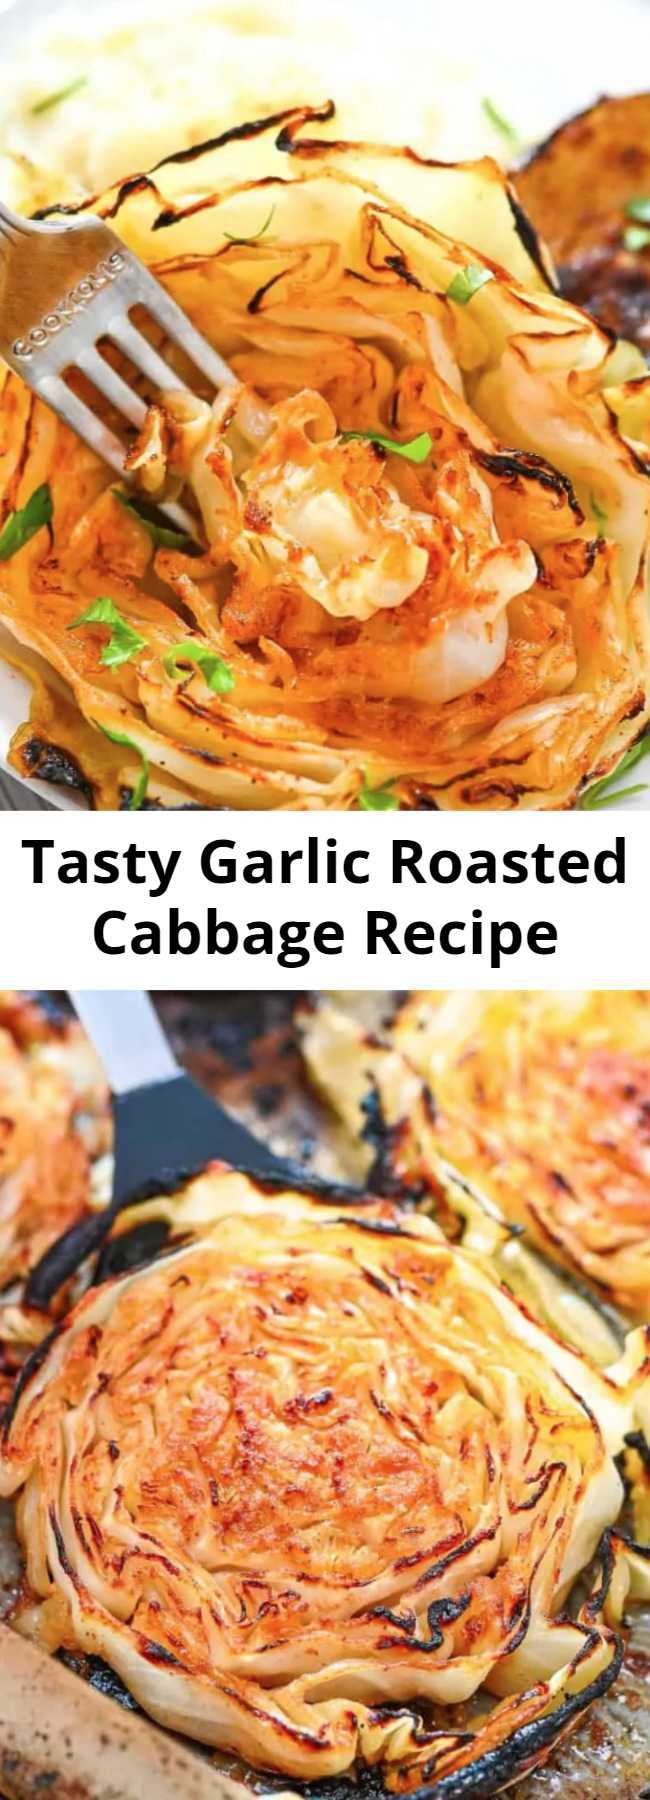 Tasty Garlic Roasted Cabbage Recipe - This Garlic Roasted Cabbage is such a tasty vegan dish. Savory with a light char, you’re going to love these delicious flavors and textures. #cabbage #dinner #vegan #plantbased #vegetarian